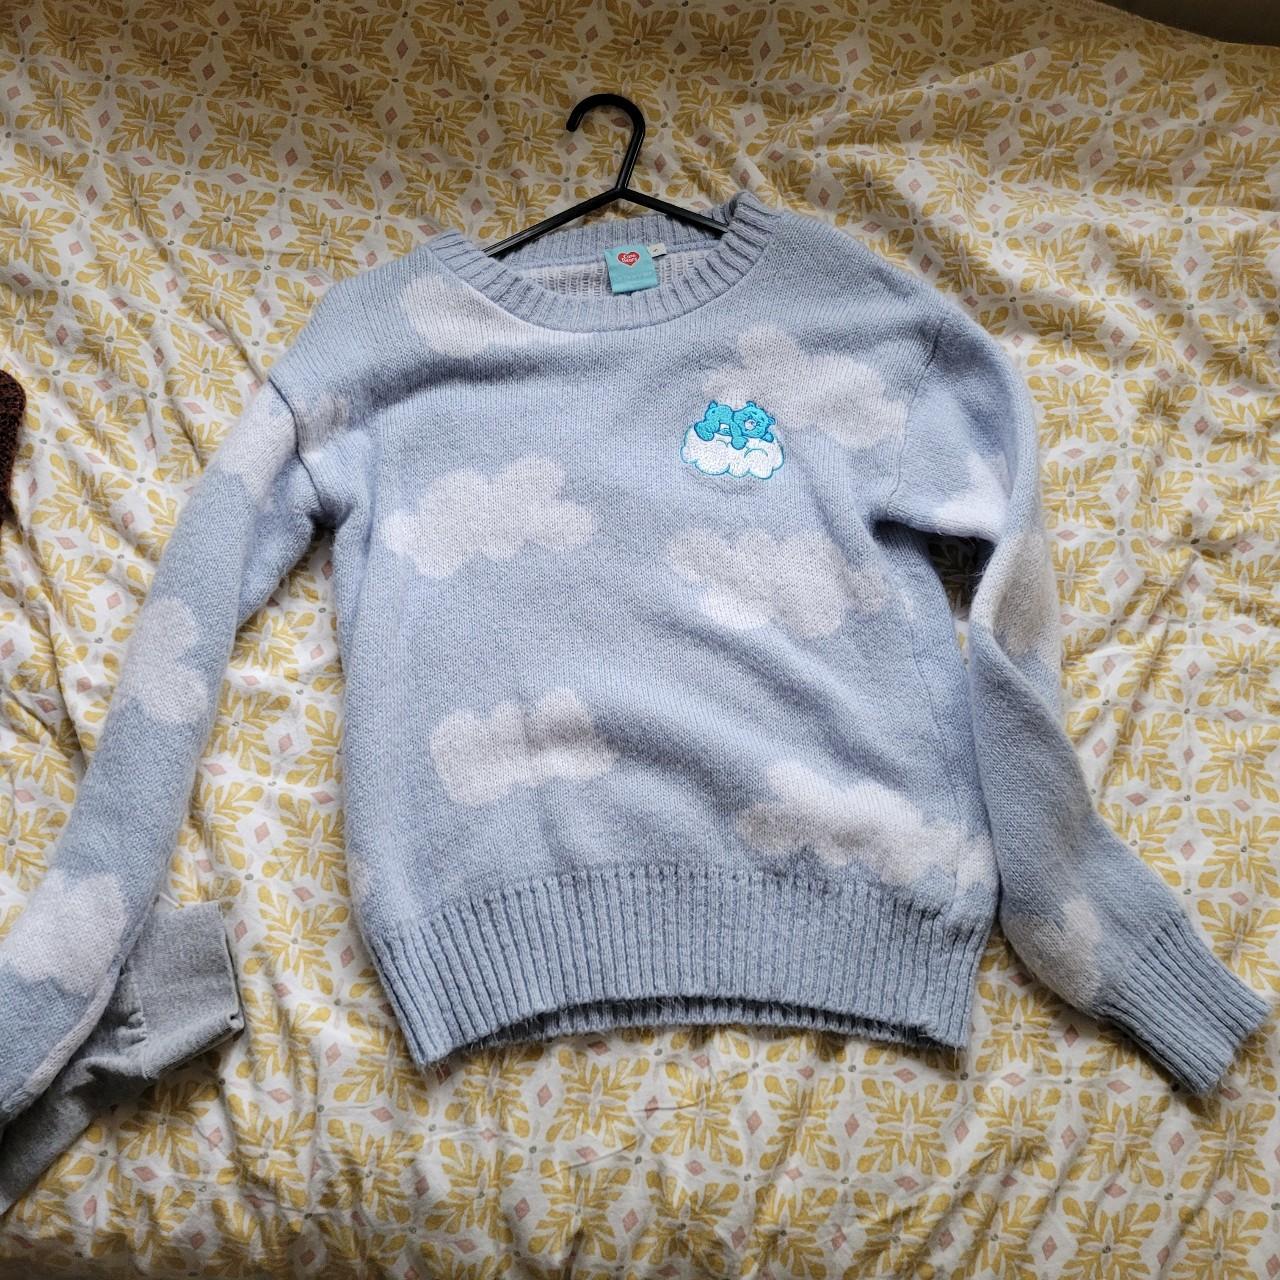 Skinnydip care bears blue cloud knitted jumper with... - Depop